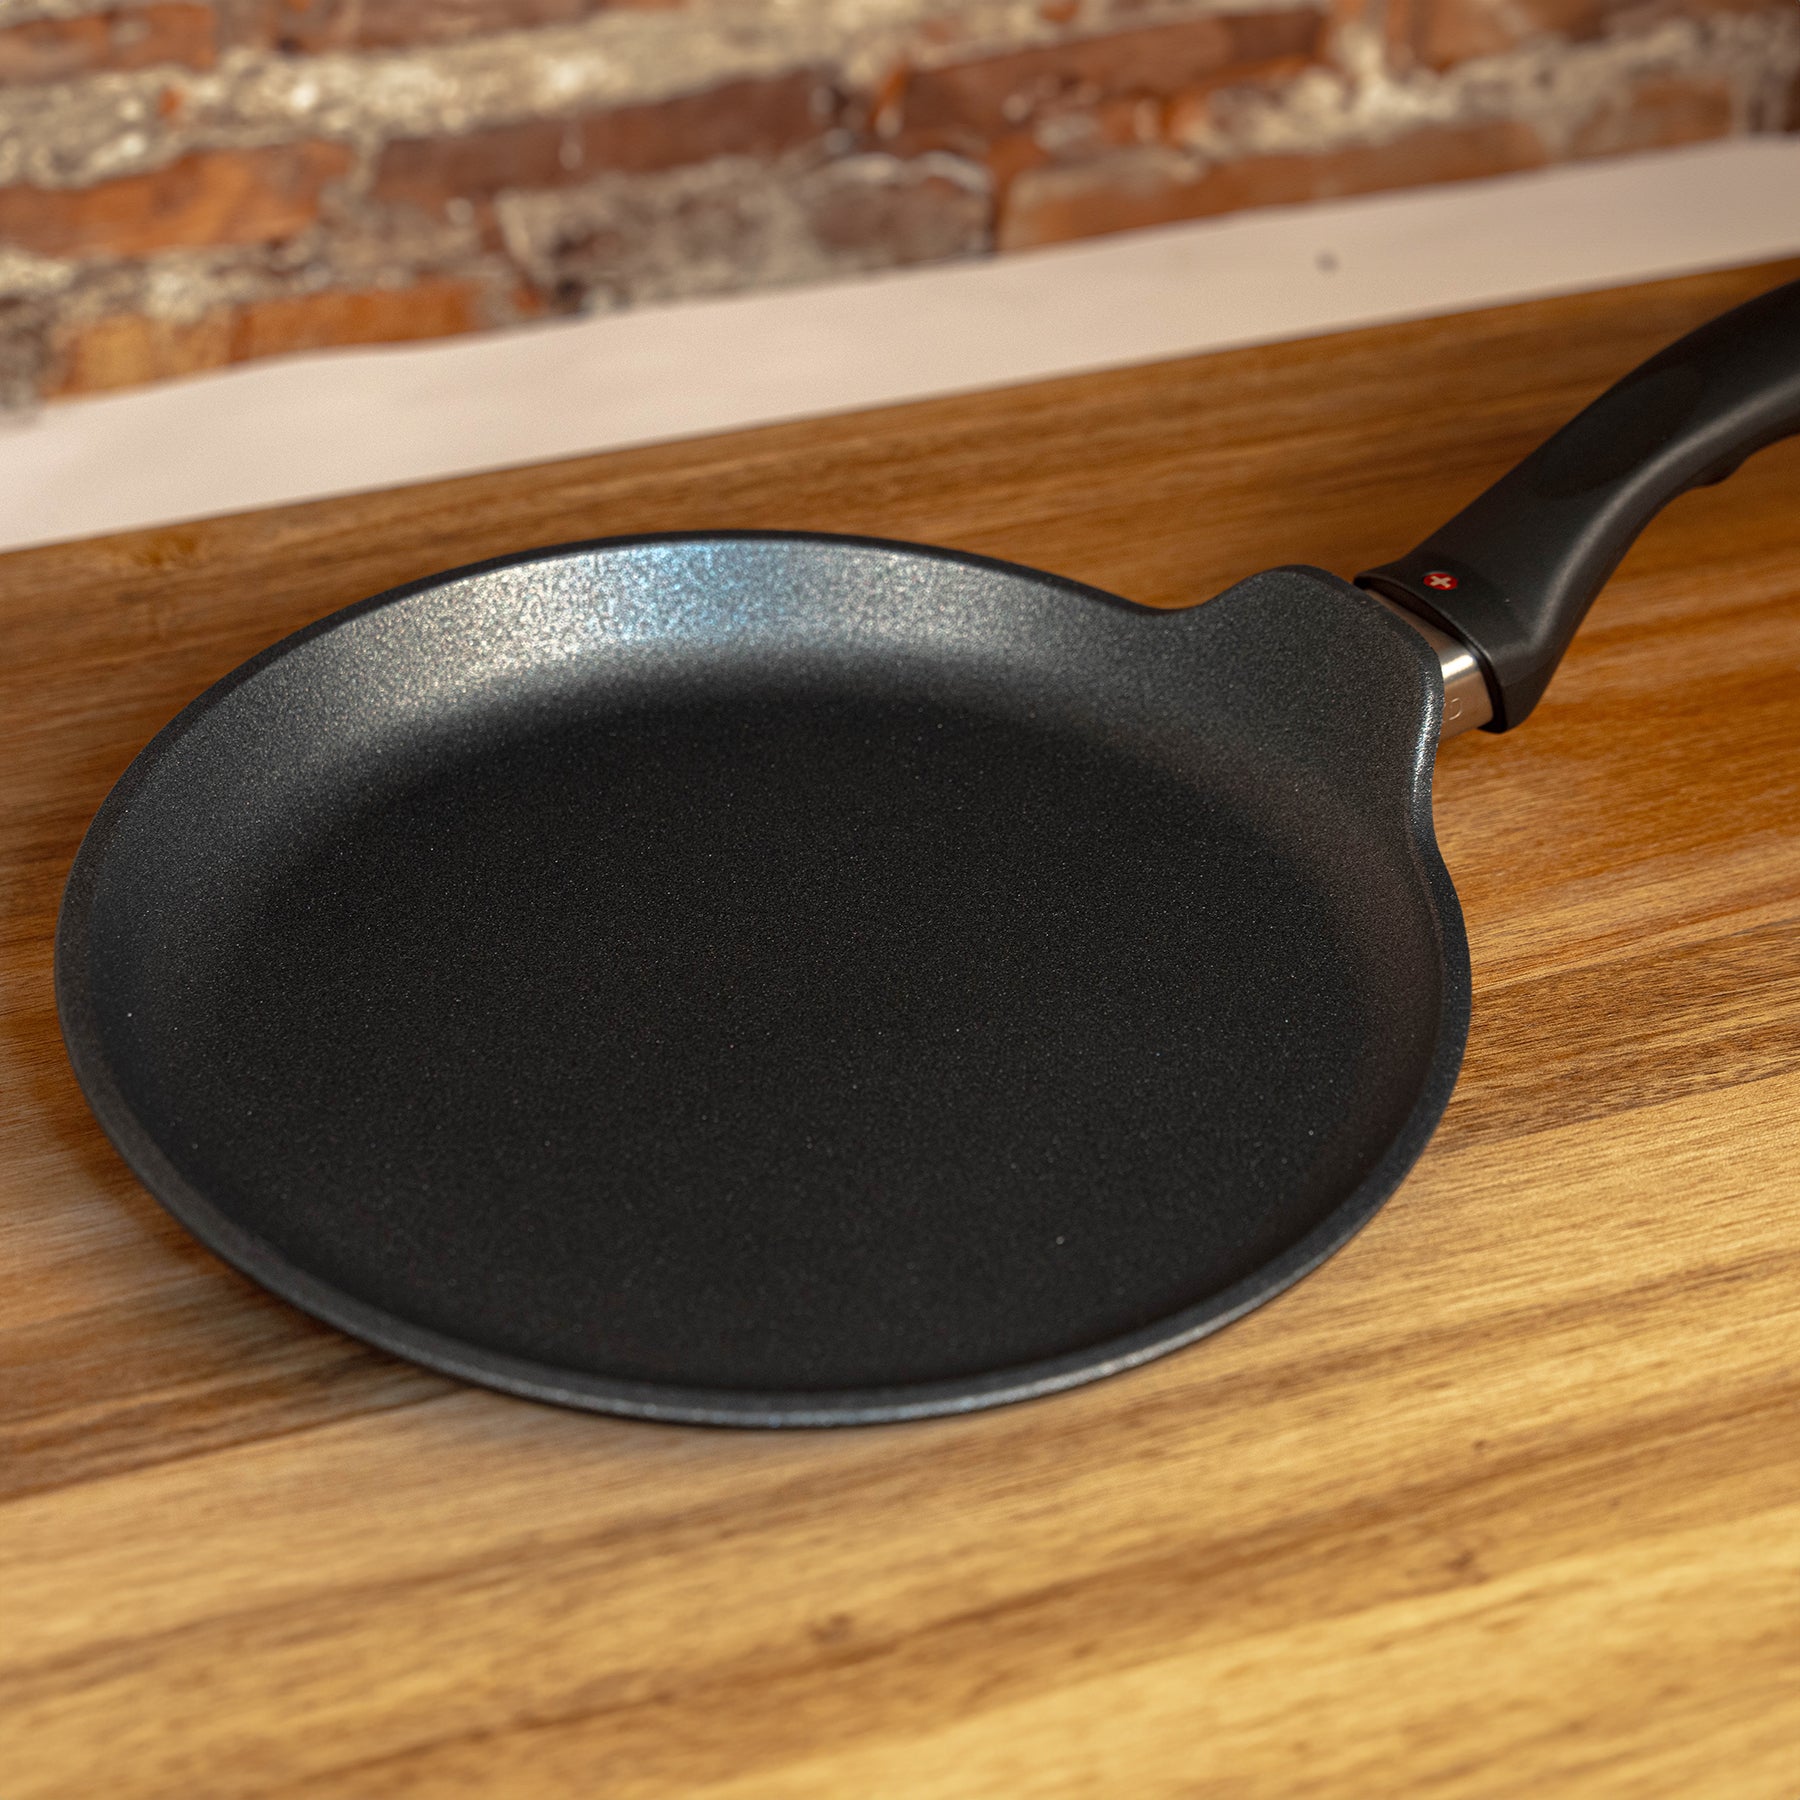 XD Nonstick Crepe Pan angled view on wooden table